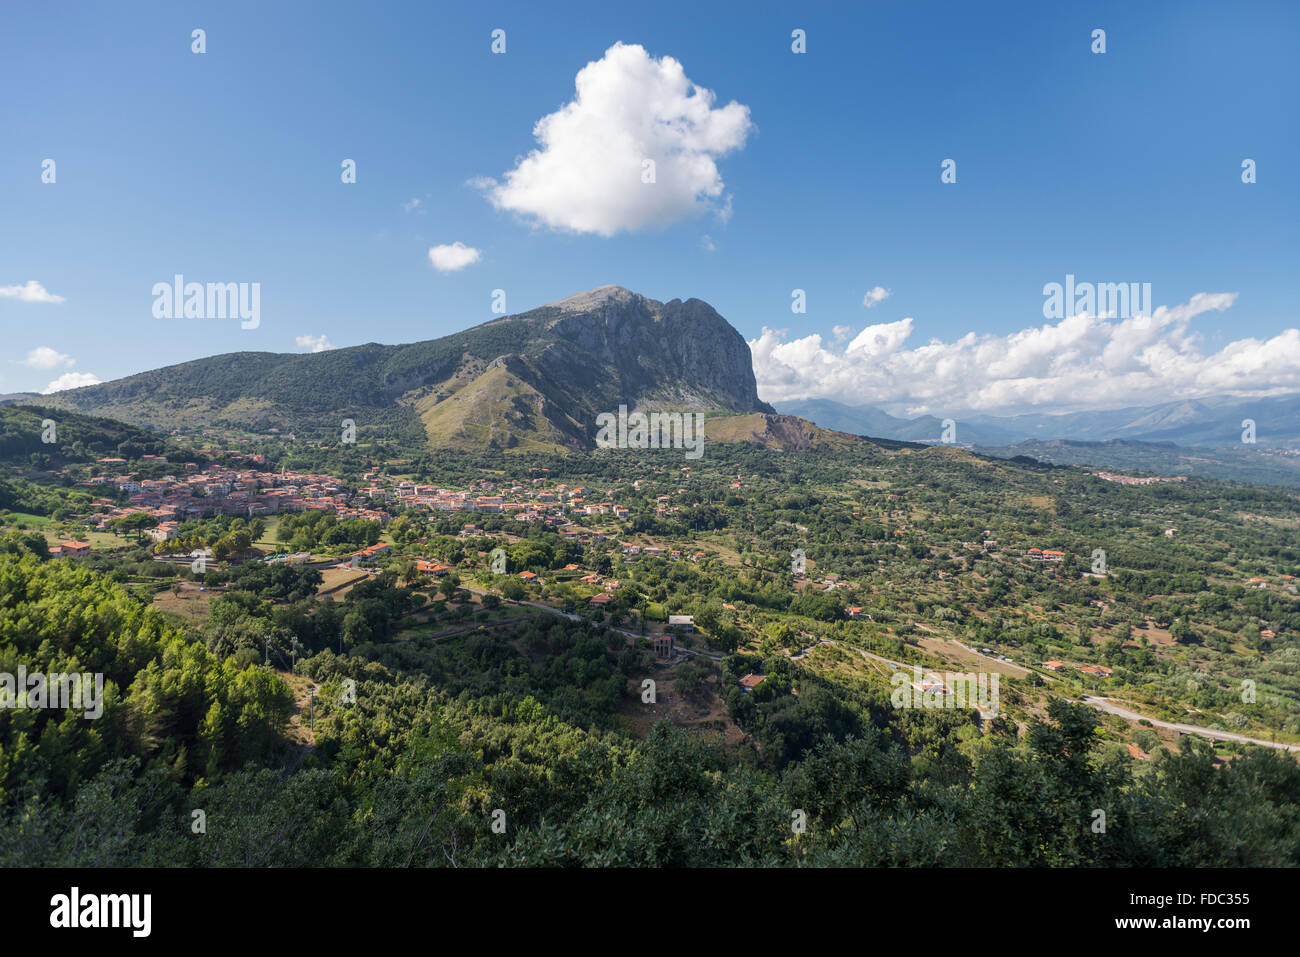 The mountain range of Monte Bulgheria and the township of San Giovanni a Piro in Cilento in afternoon sunlight, Campania, Italy Stock Photo